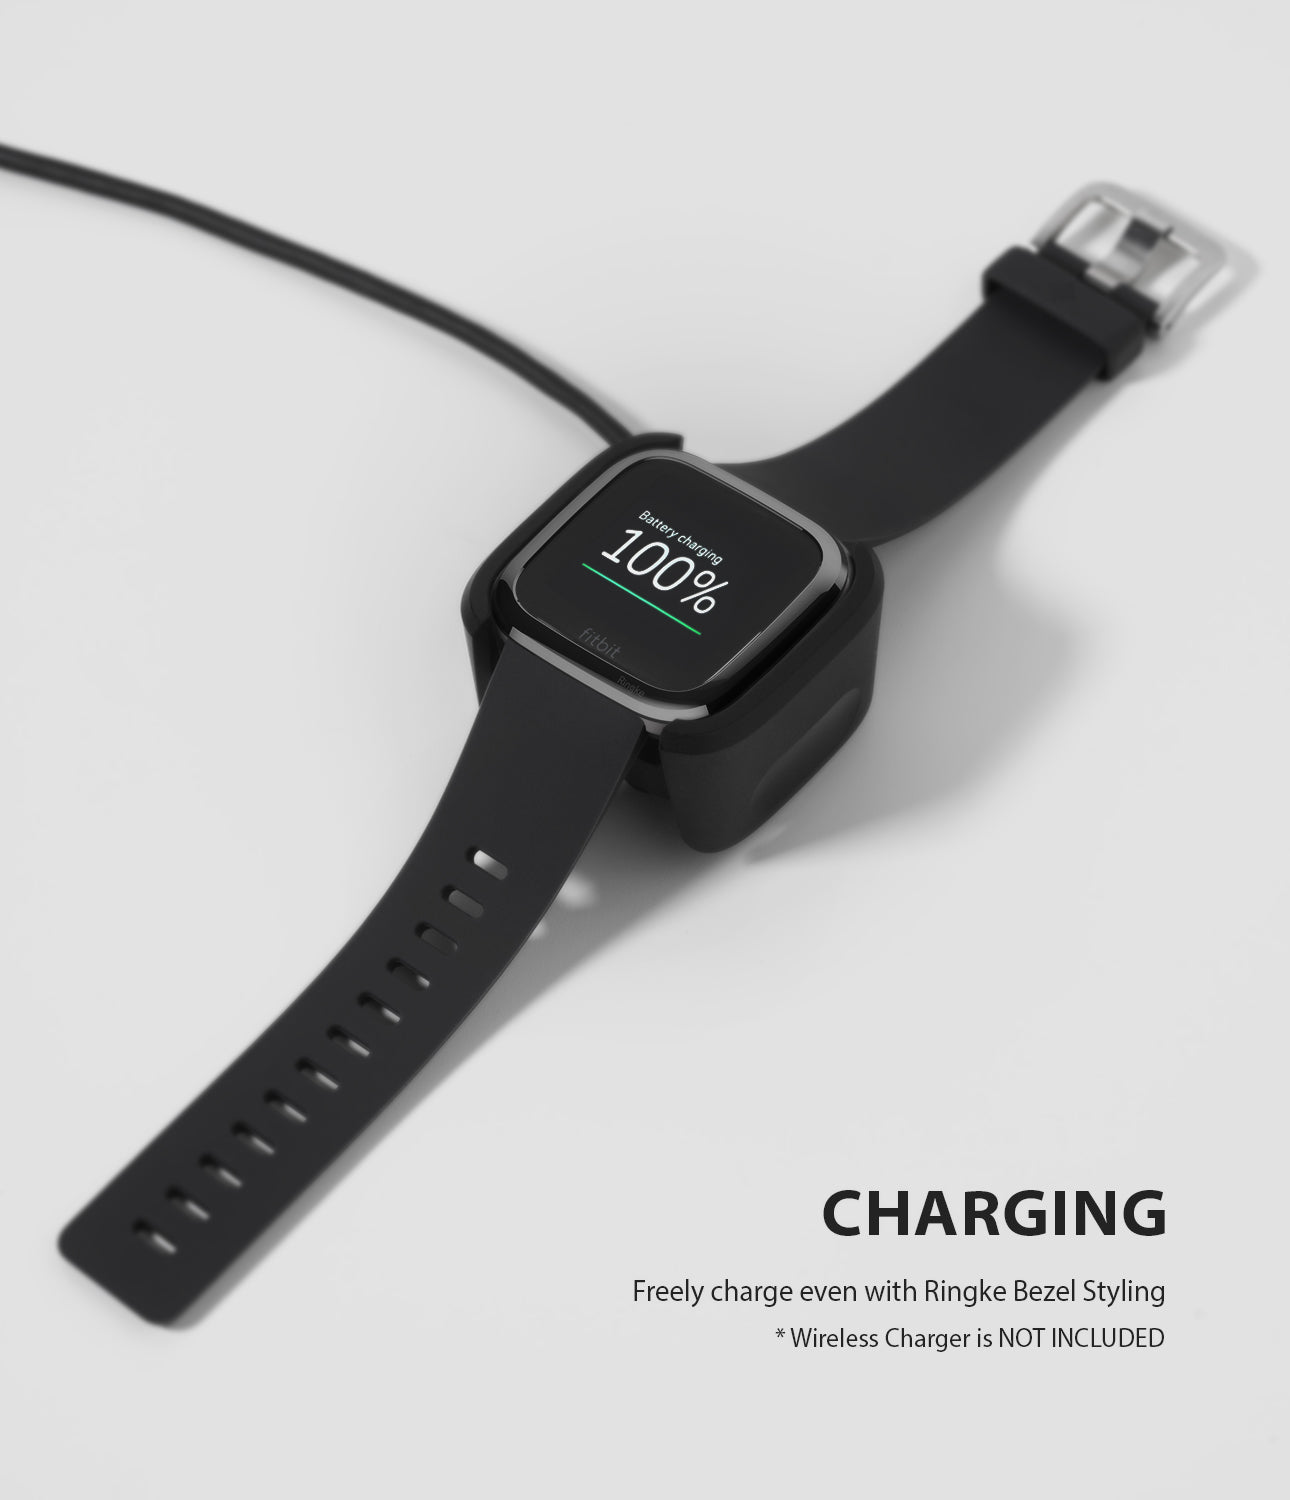 Ringke Bezel Styling Fitbit Versa 2, Full Stainless Steel Frame, Black, 2-03 ST, wireless charger compatible